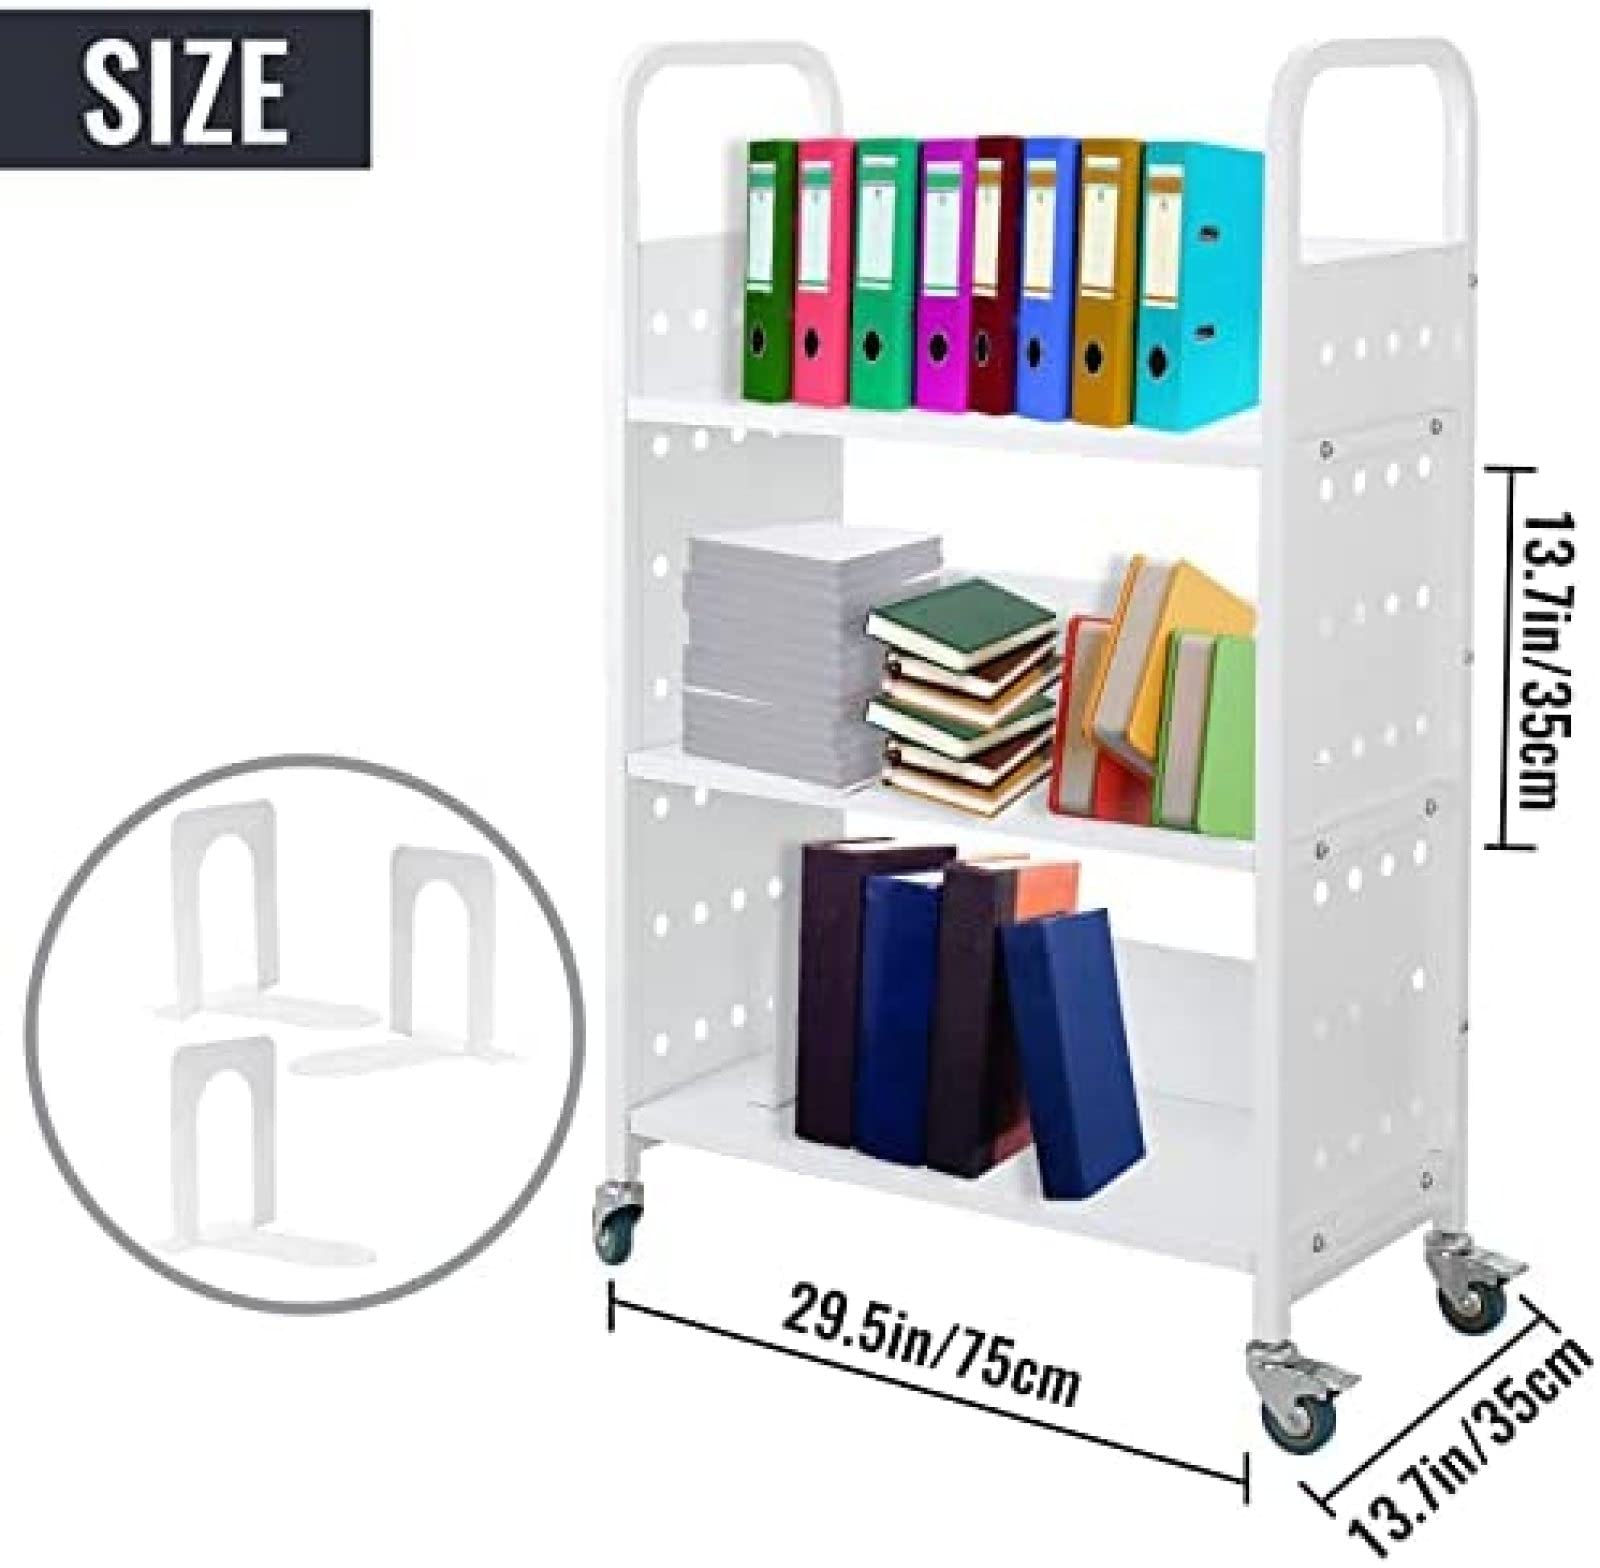 Book Cart, 200 LBS Library Cart, Rolling Book Cart, Single Sided L-Shaped/V-Shaped Sloped Shelves with Lockable Wheels for Home Shelves Office School Book Truck